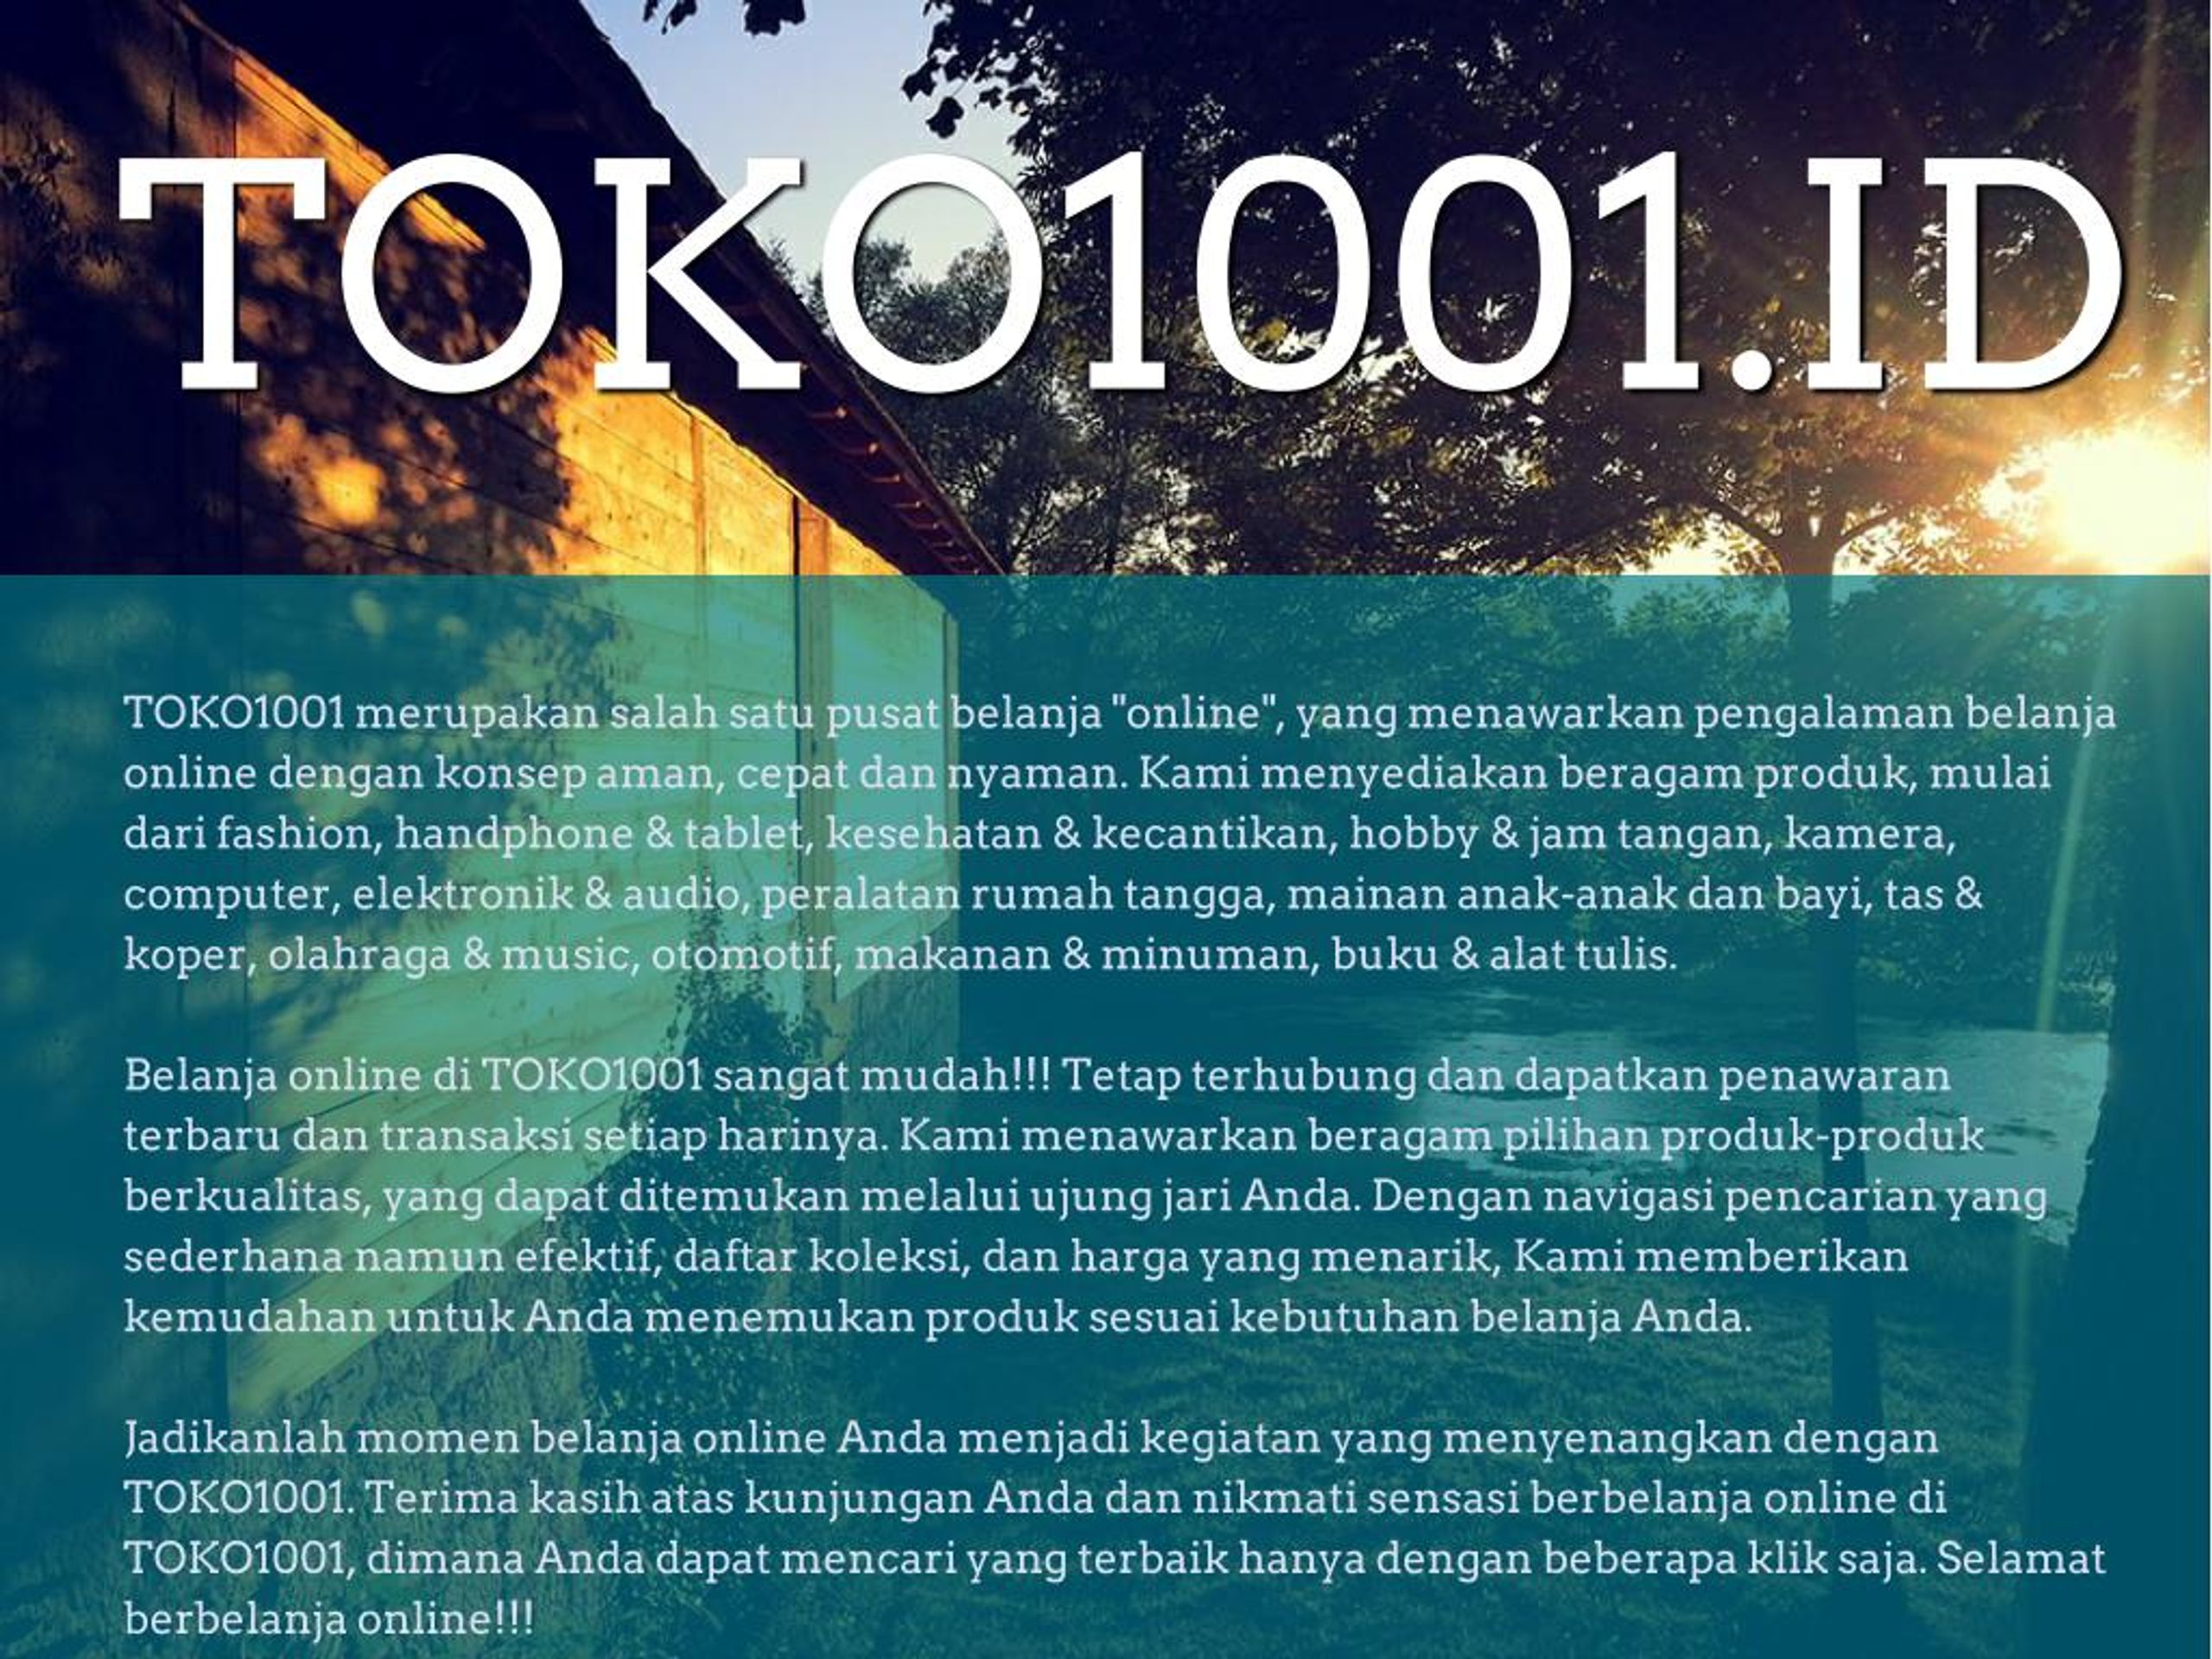 PPT Mesin Cuci 2 Tabung by toko1001 id PowerPoint 